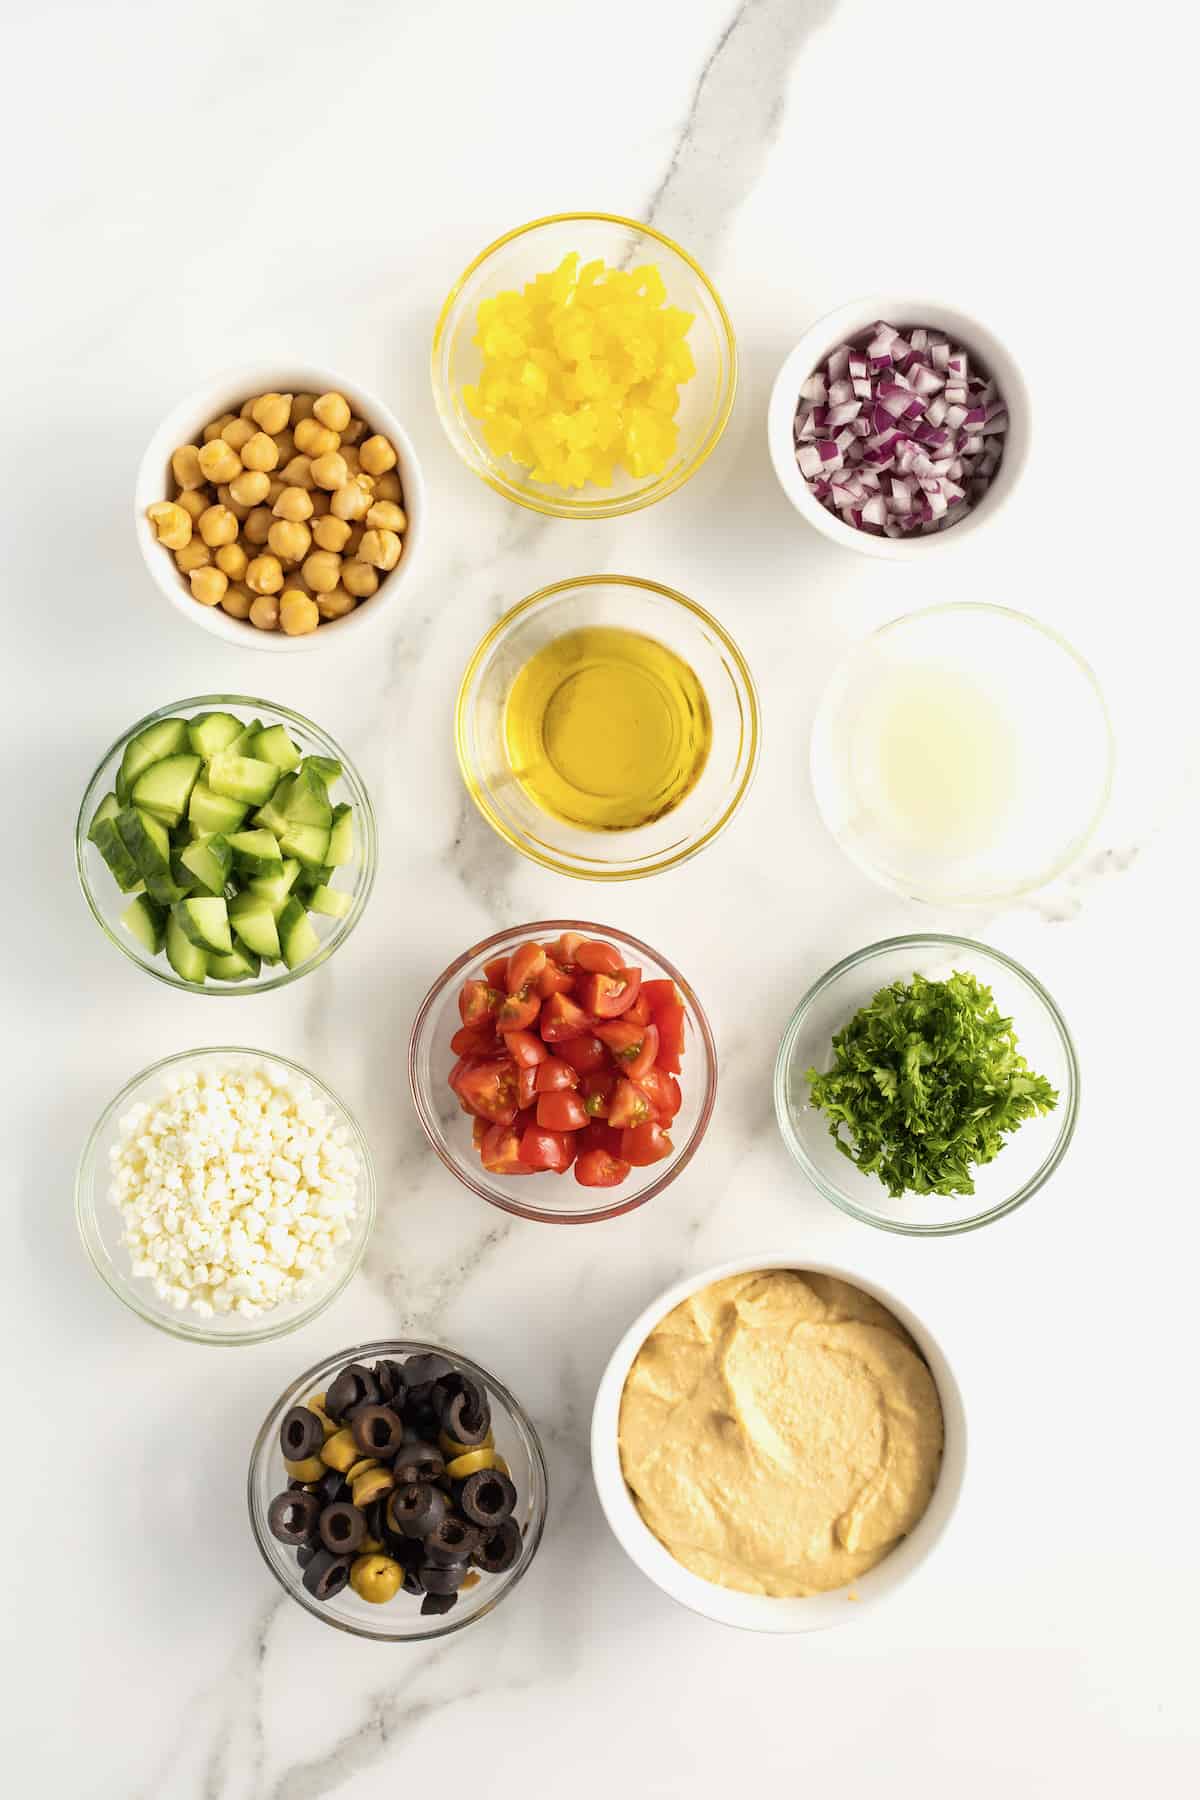 Tomatoes, olives, cucumber, chickpeas, red onion and pepperoncini peppers in glass and ceramic dishes and hummus in a white ceramic dish.